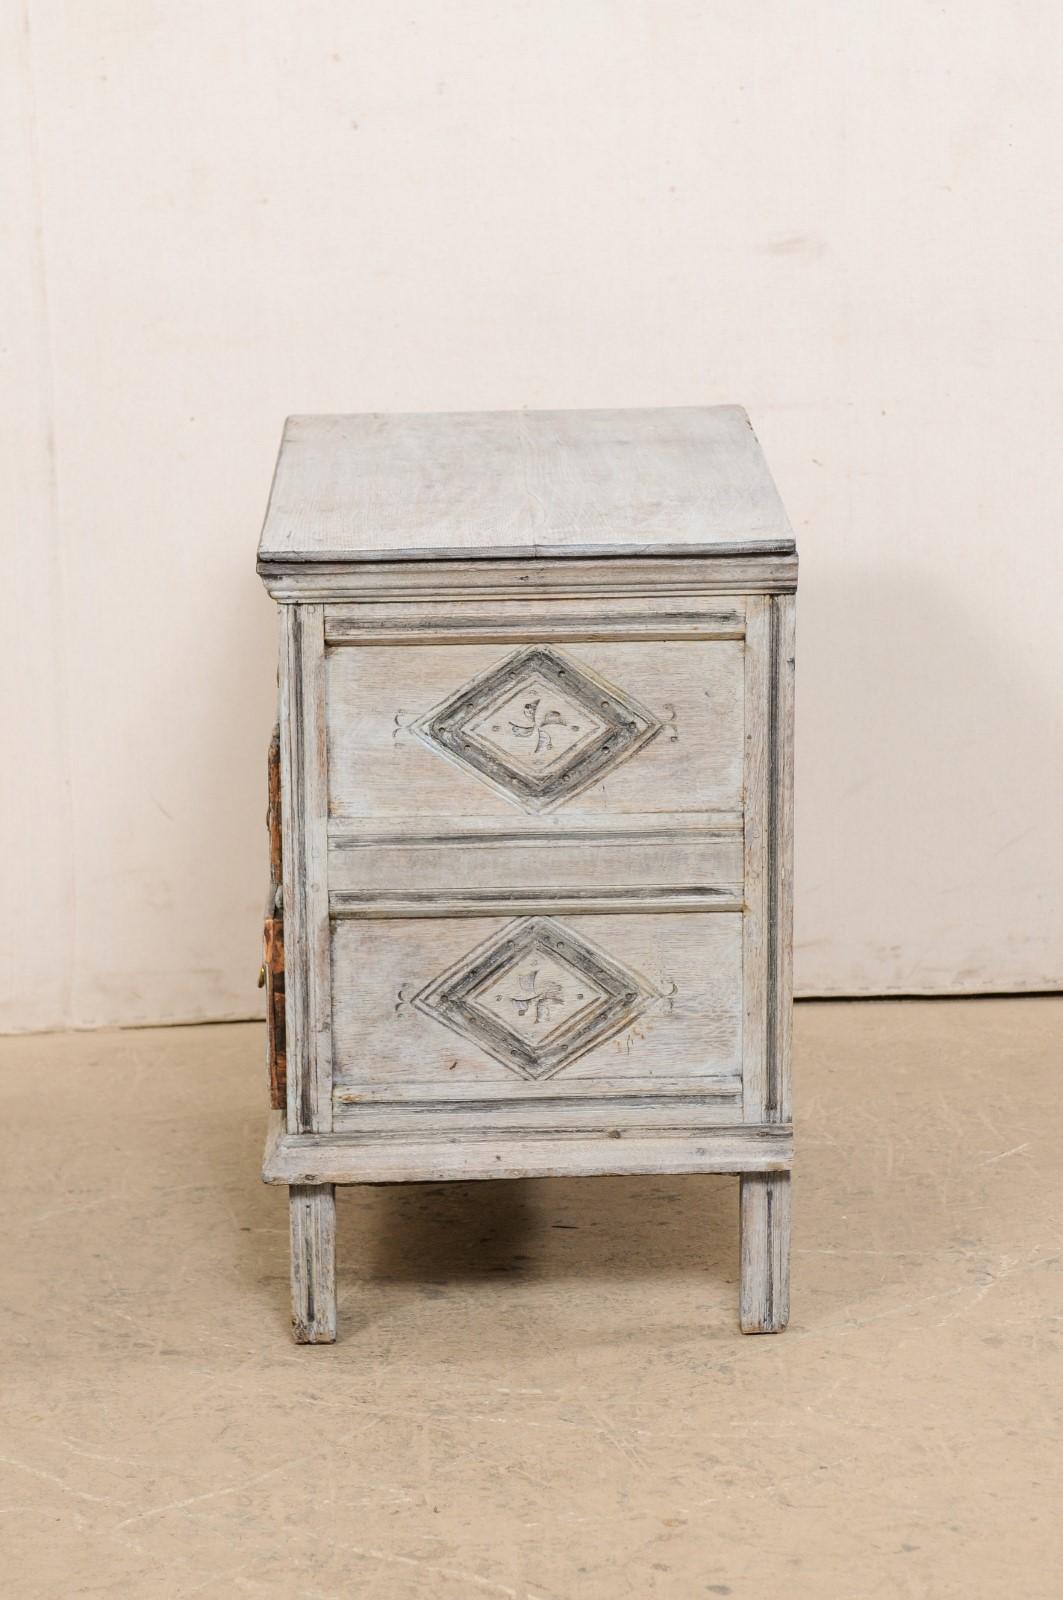 19th C. English Smaller-Sized Chest Adorn in Geometrically Carved Panels  8